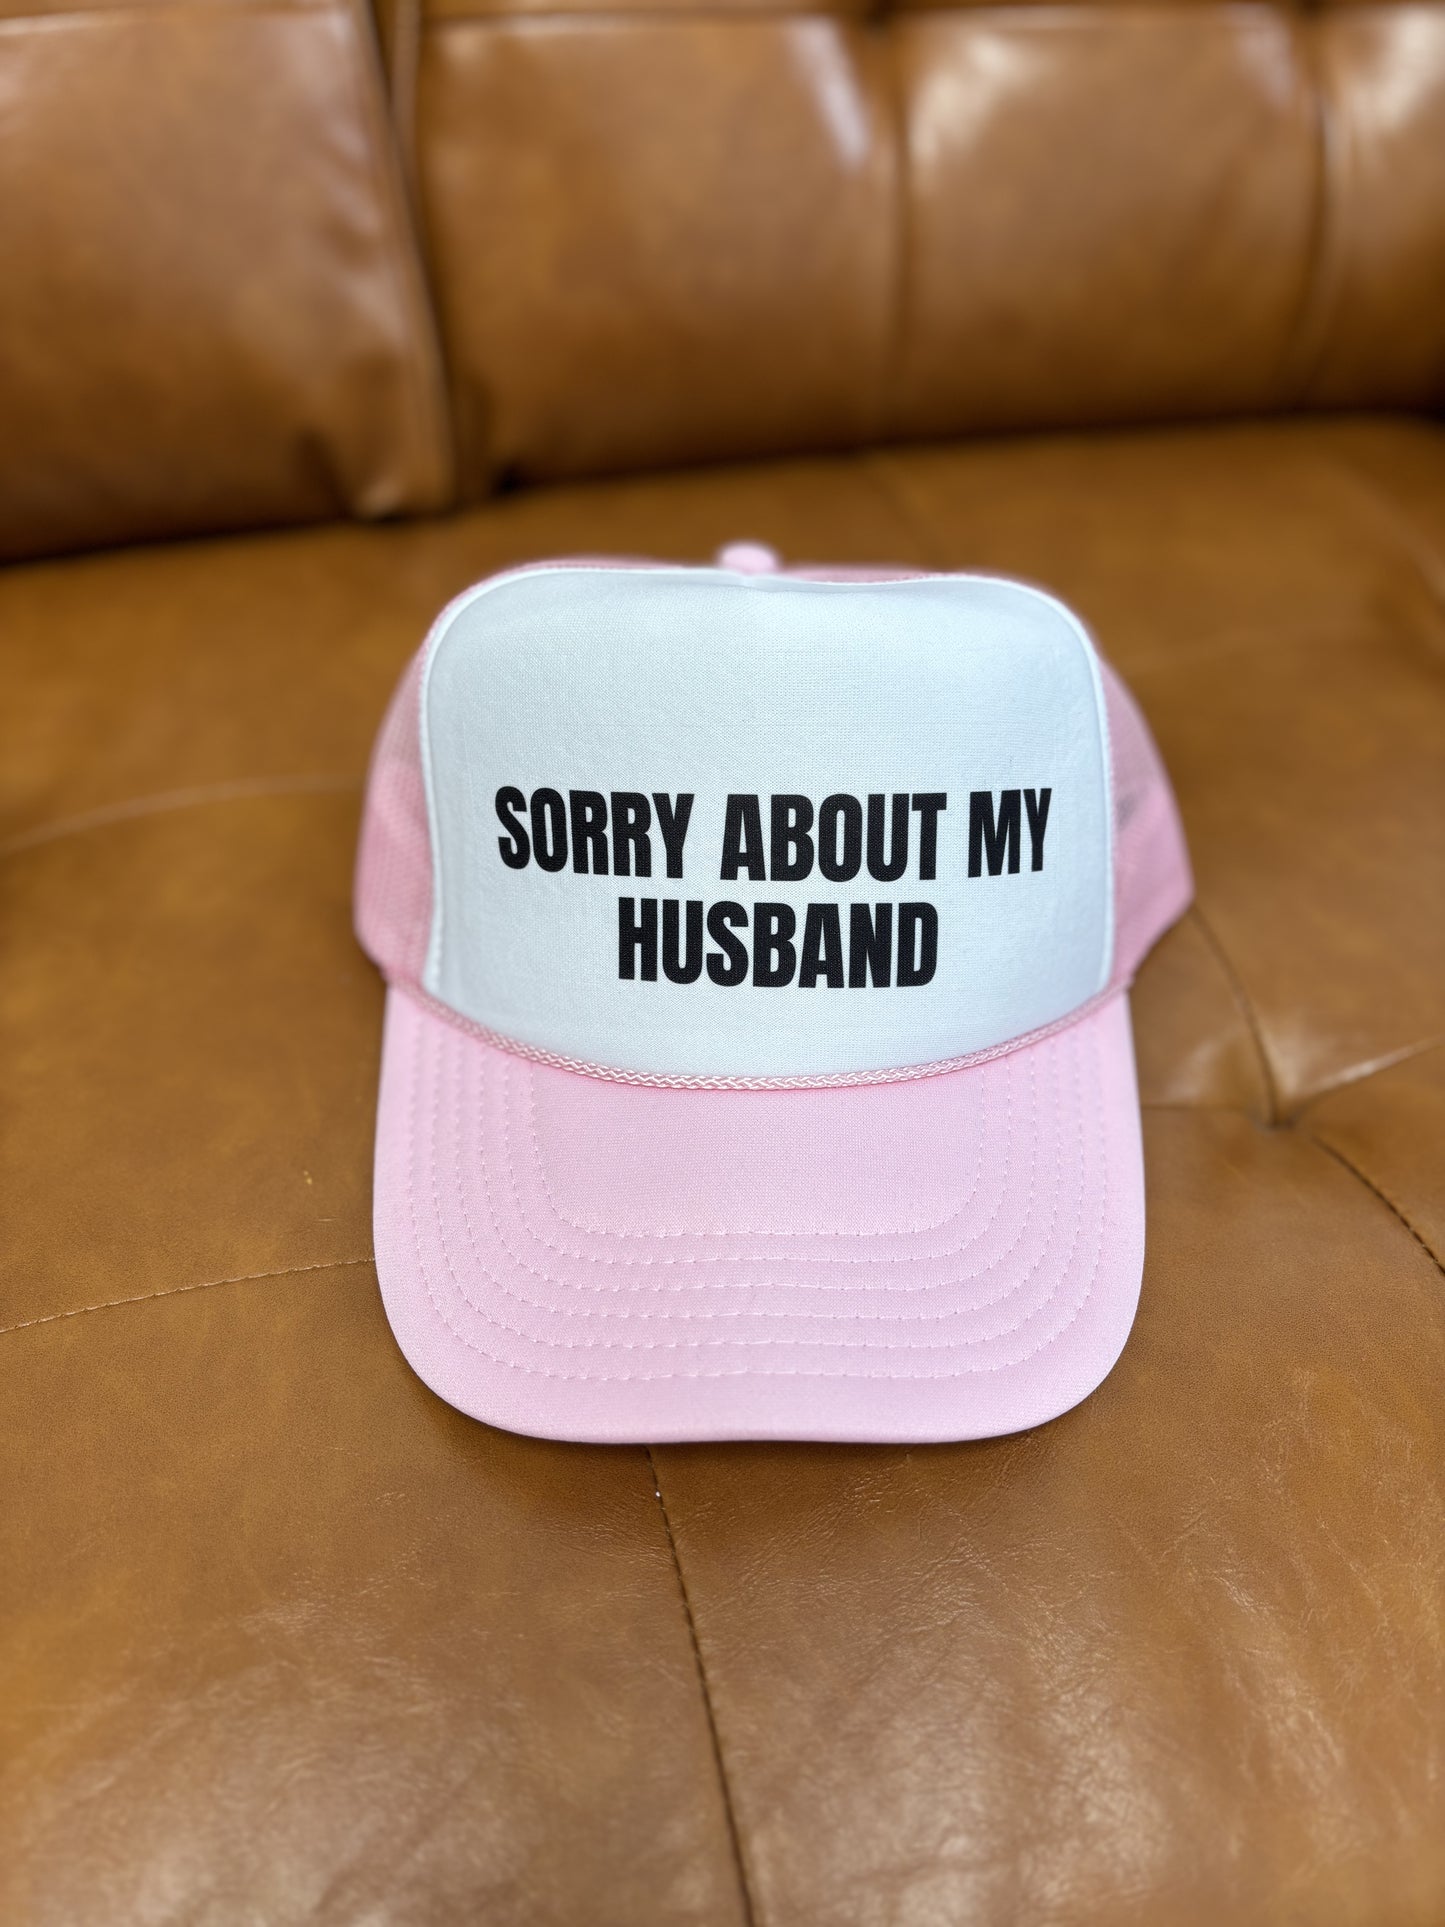 Sorry About My Husband Trucker Hat